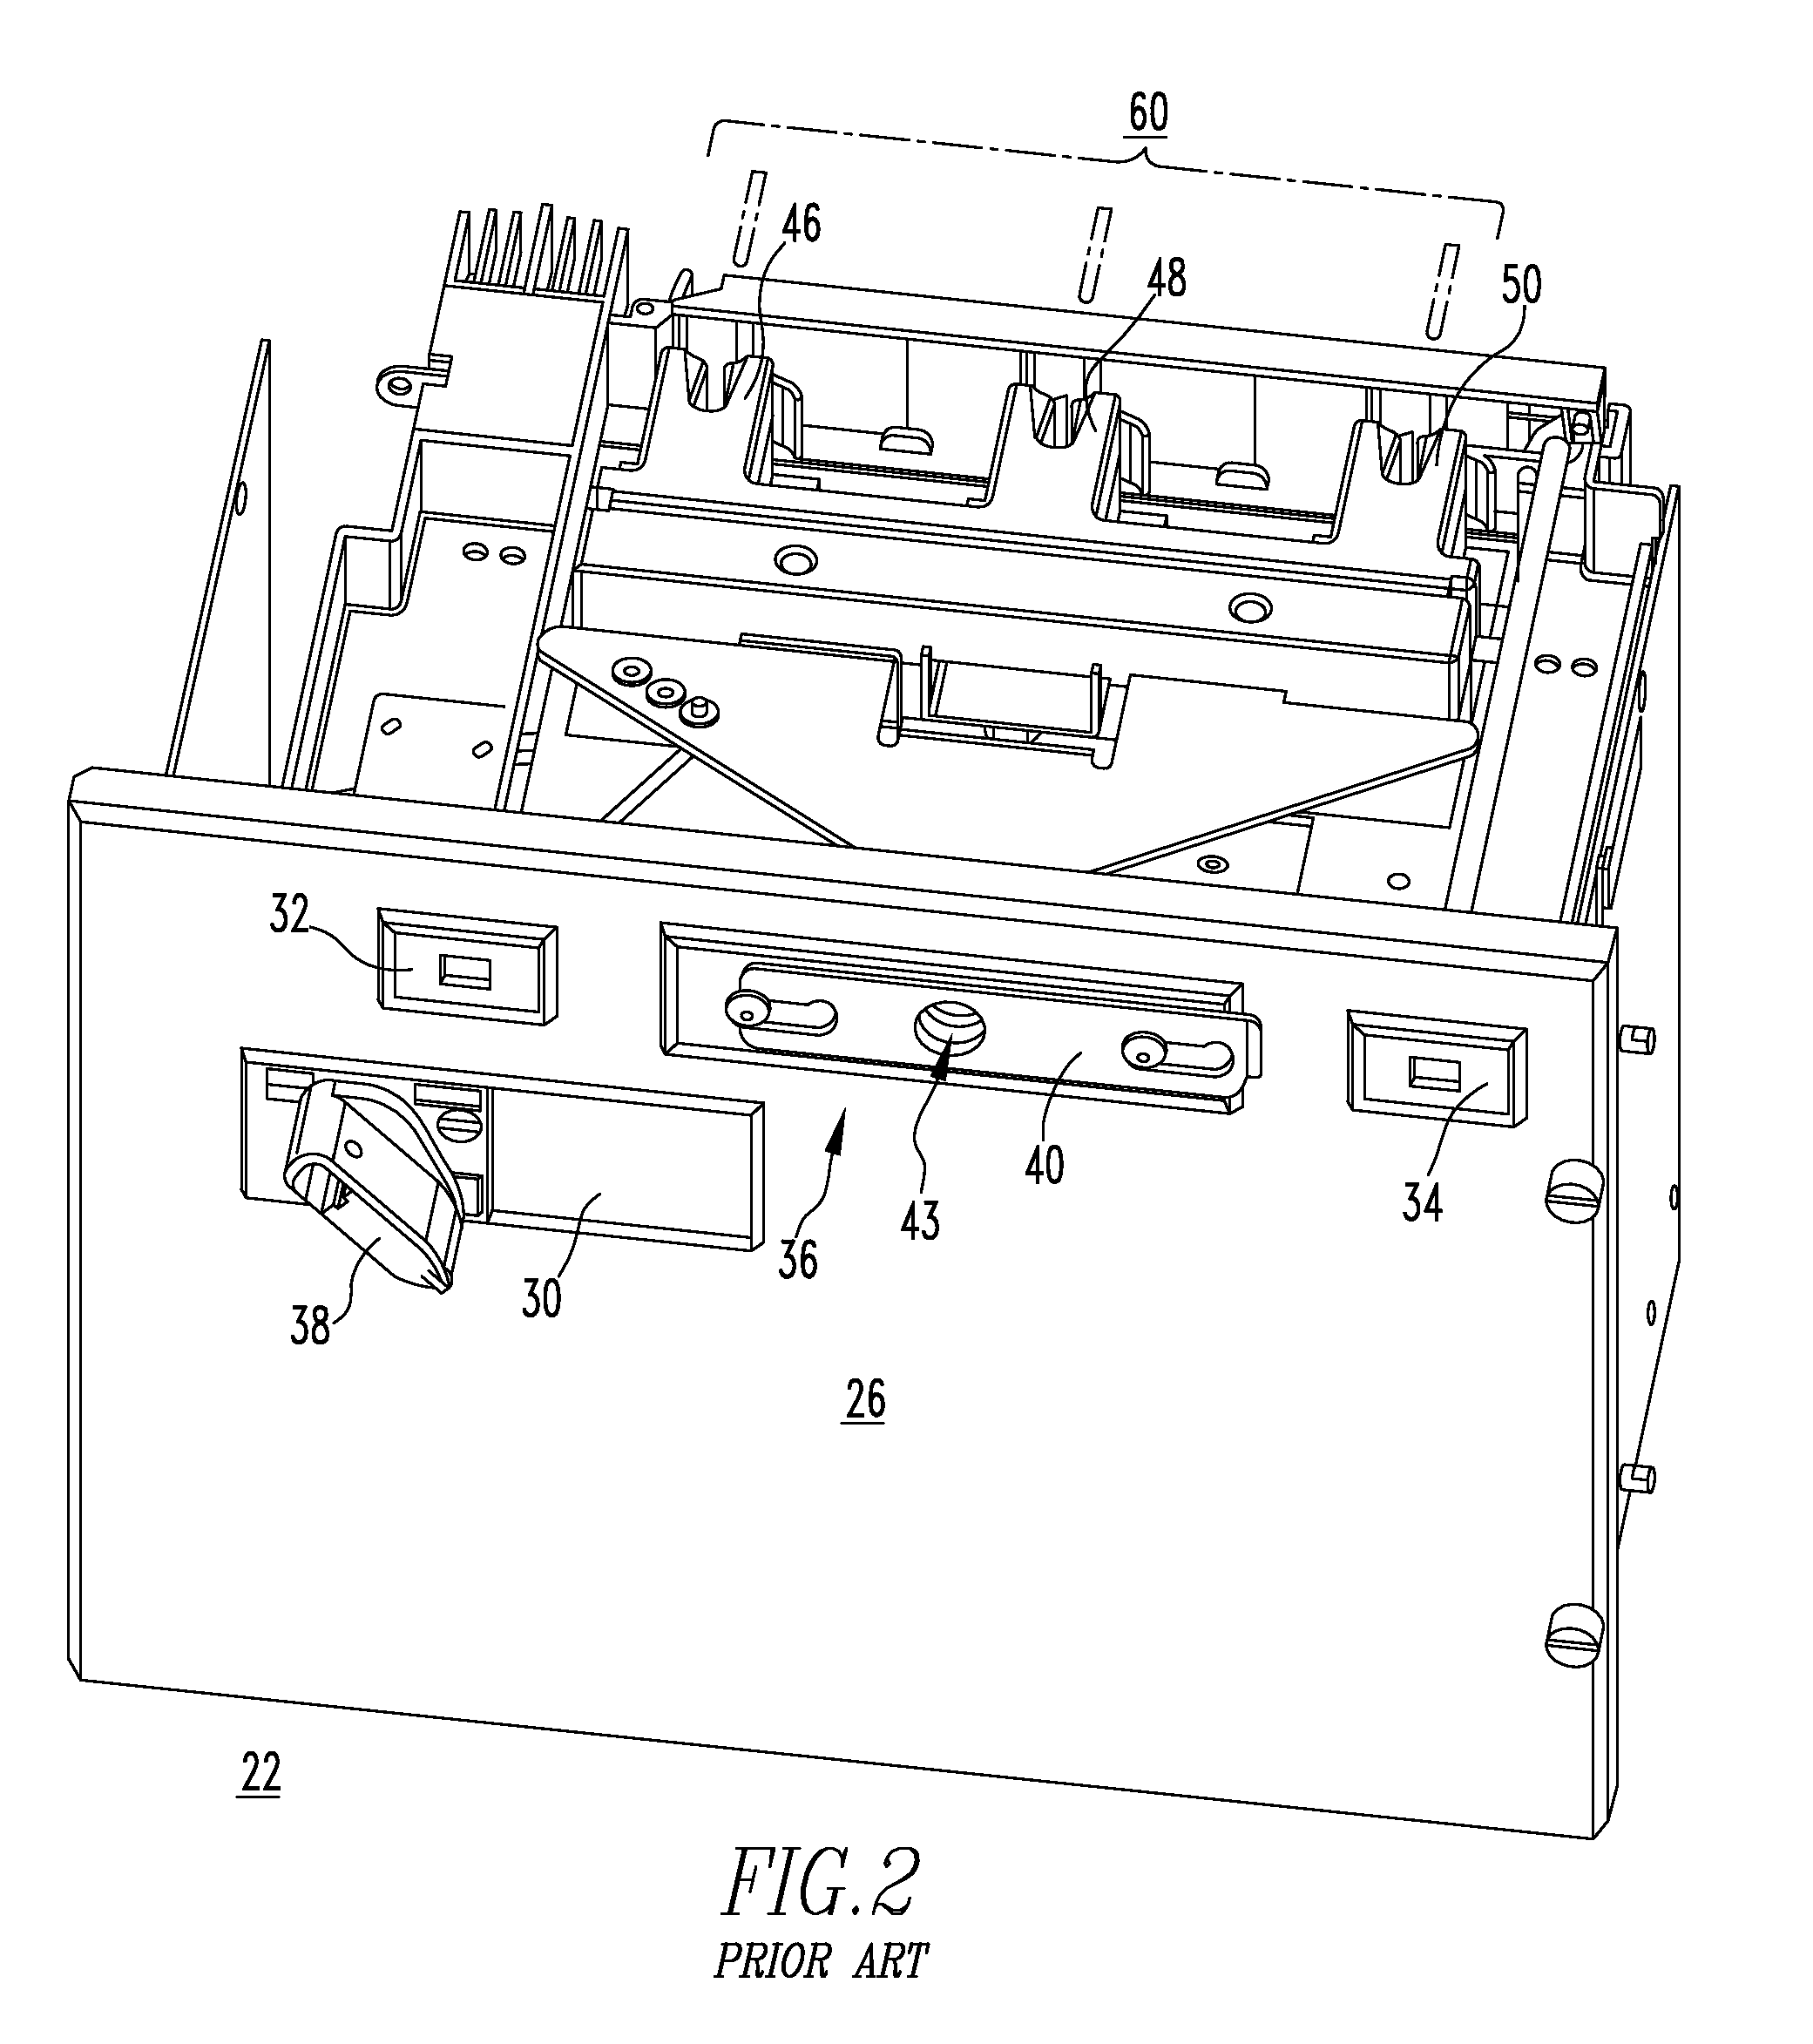 Motor control center and bus assembly therefor